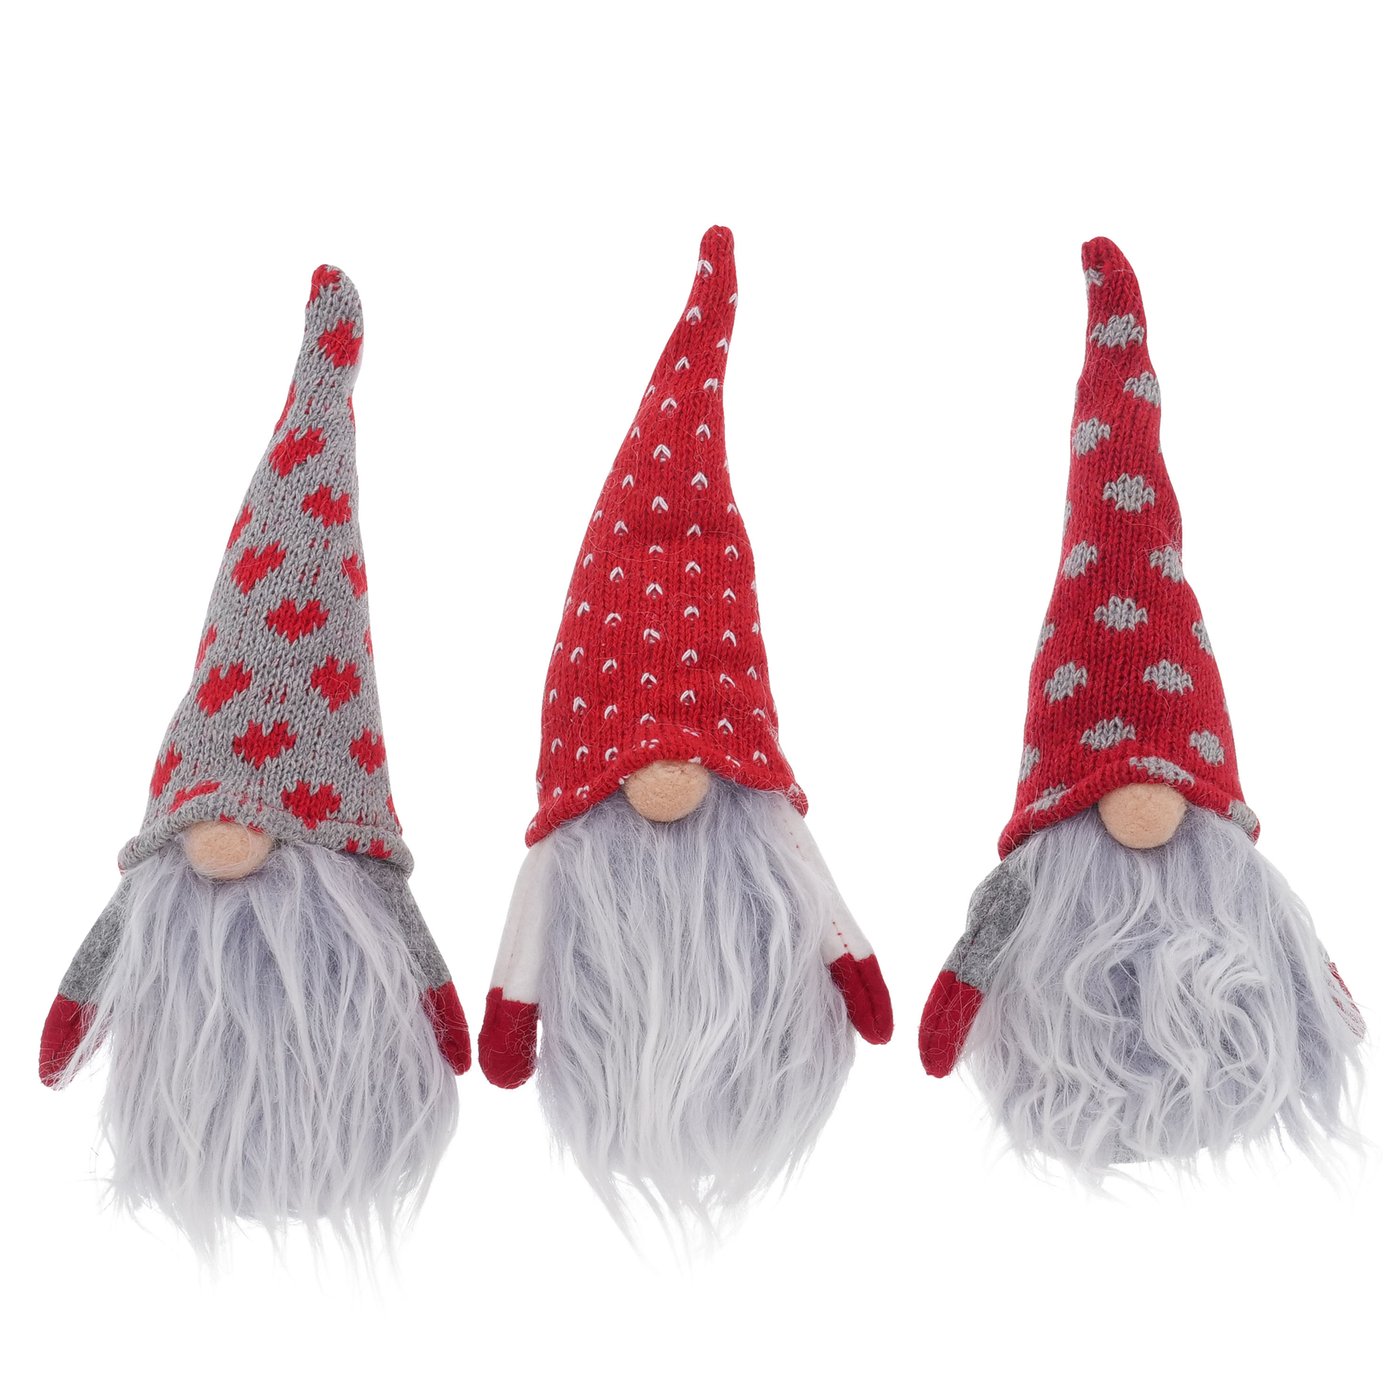 &Quirky Hanging Gonk Figure : Grey Hat, Red Hat with Dots or Red Hat Large Spots